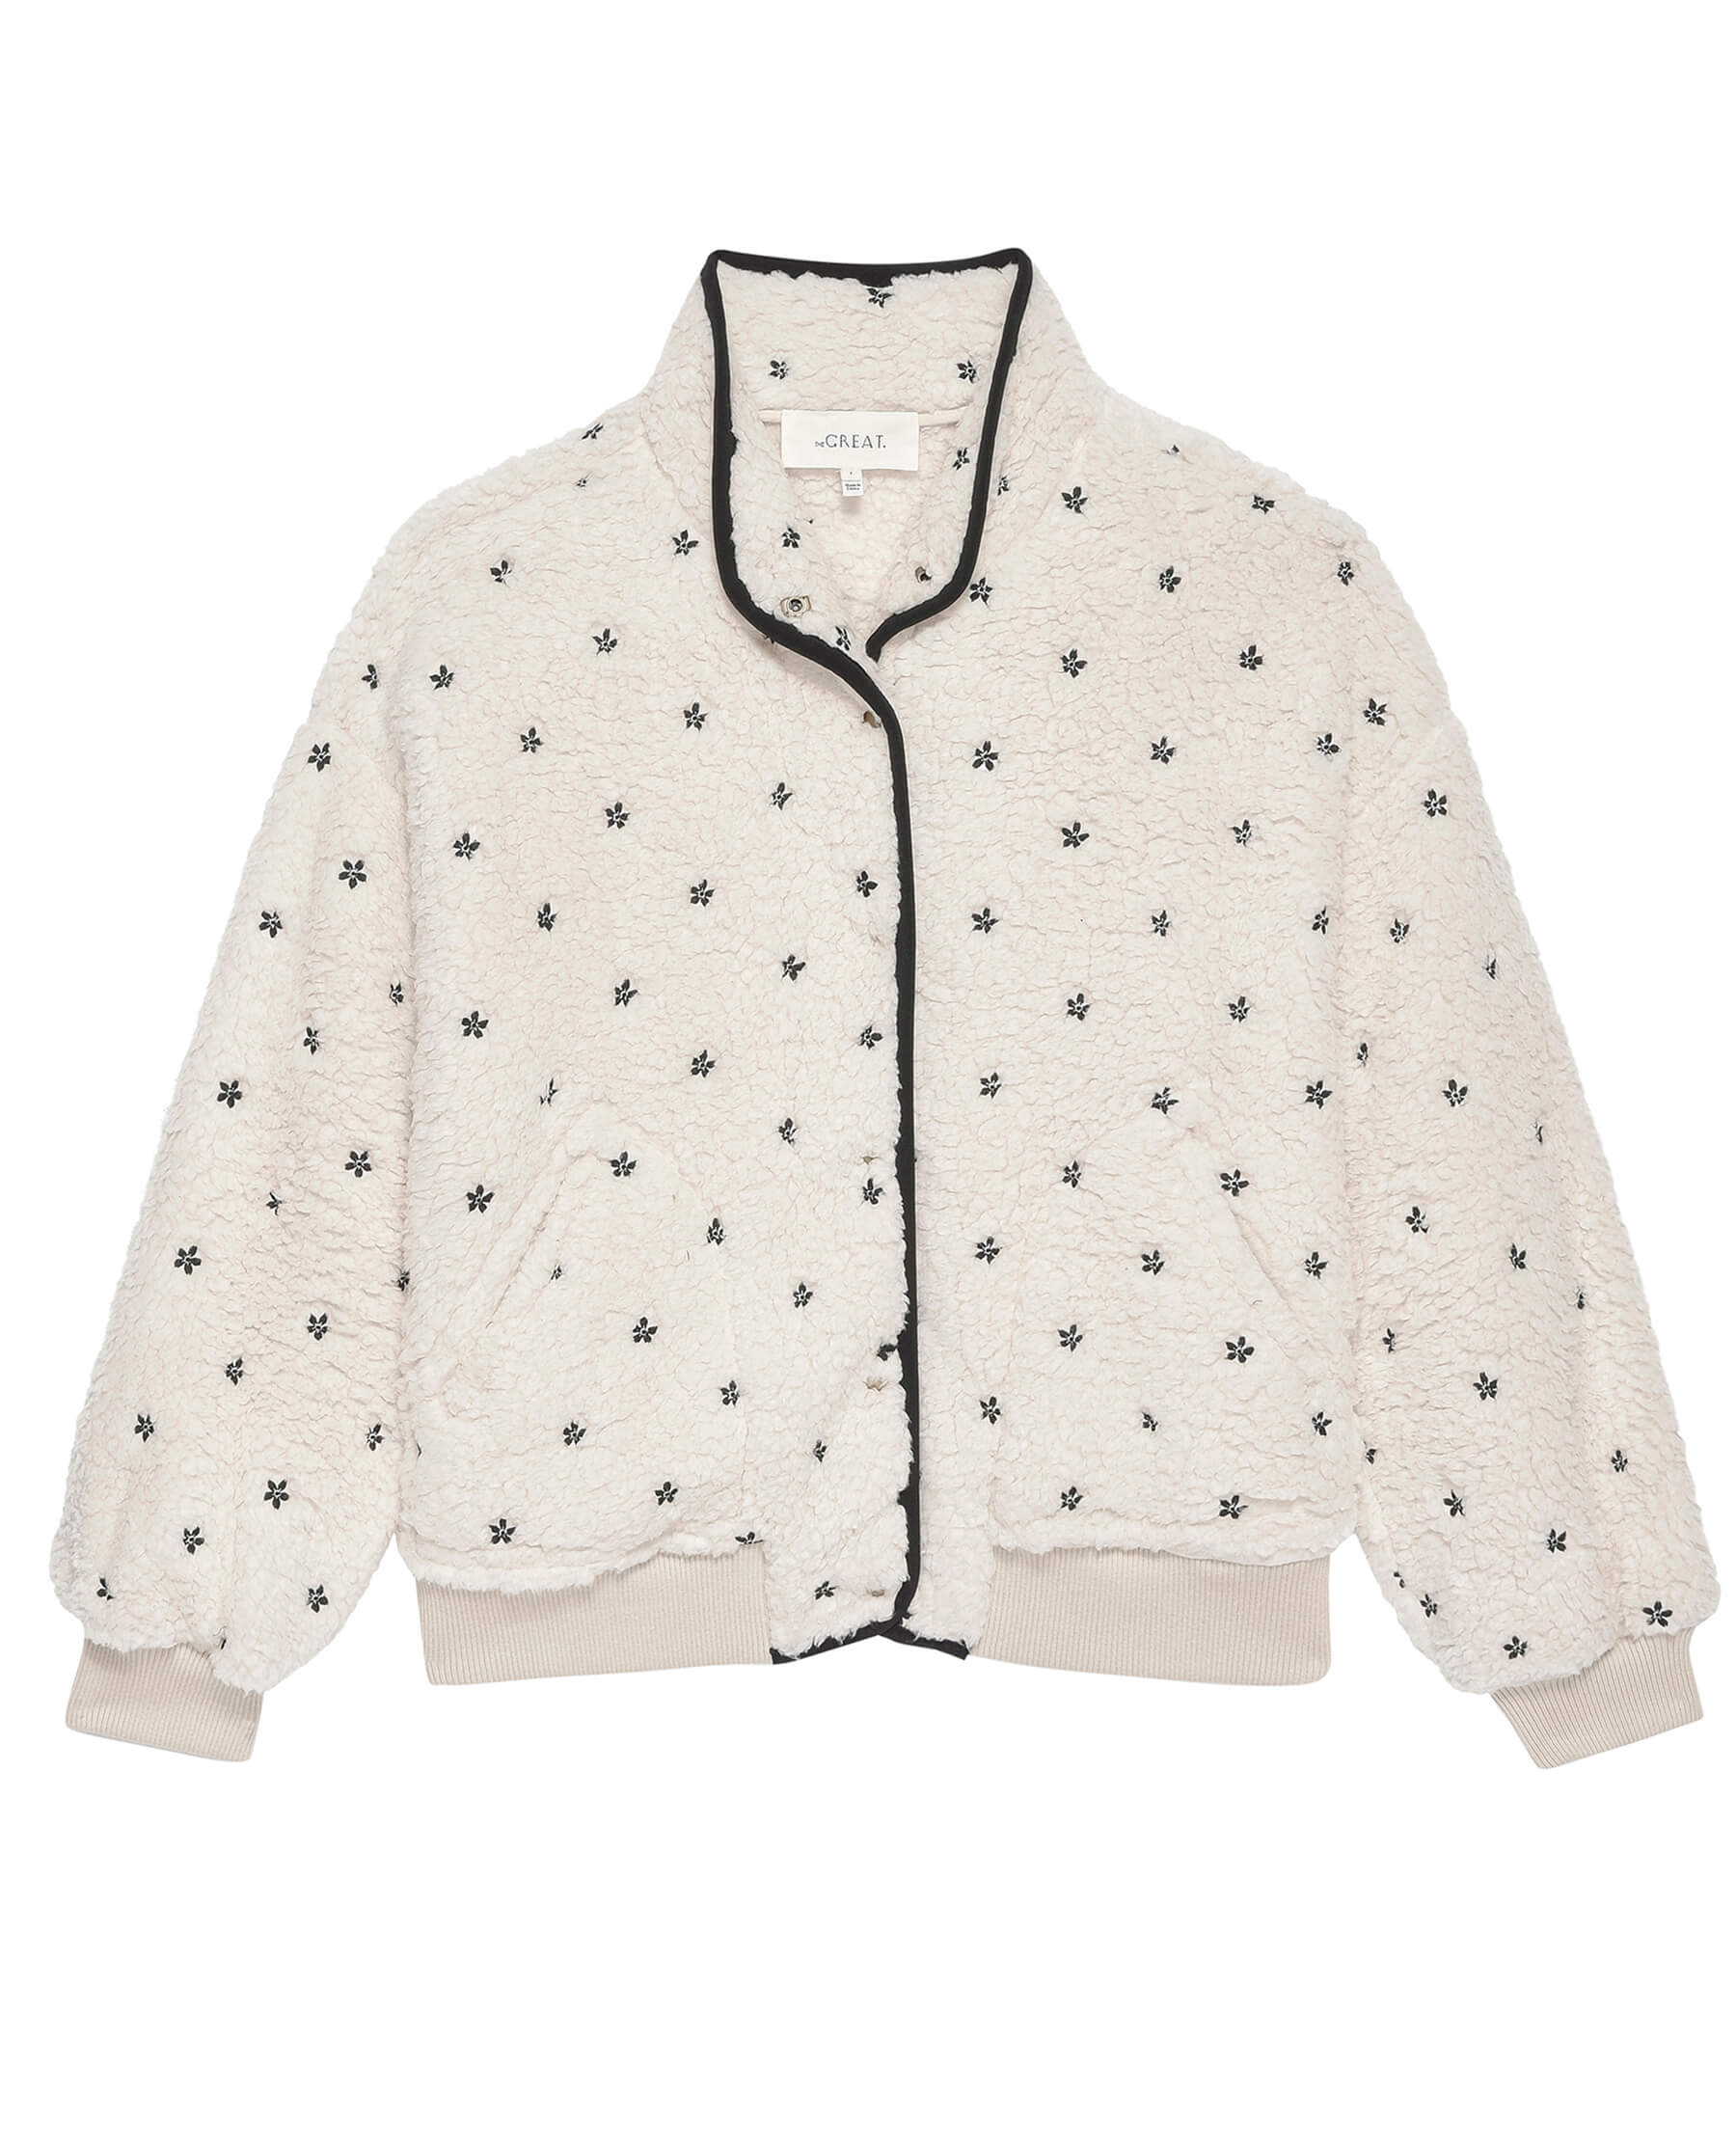 The Blackbird Jacket. -- Cream with Black Floral Embroidery